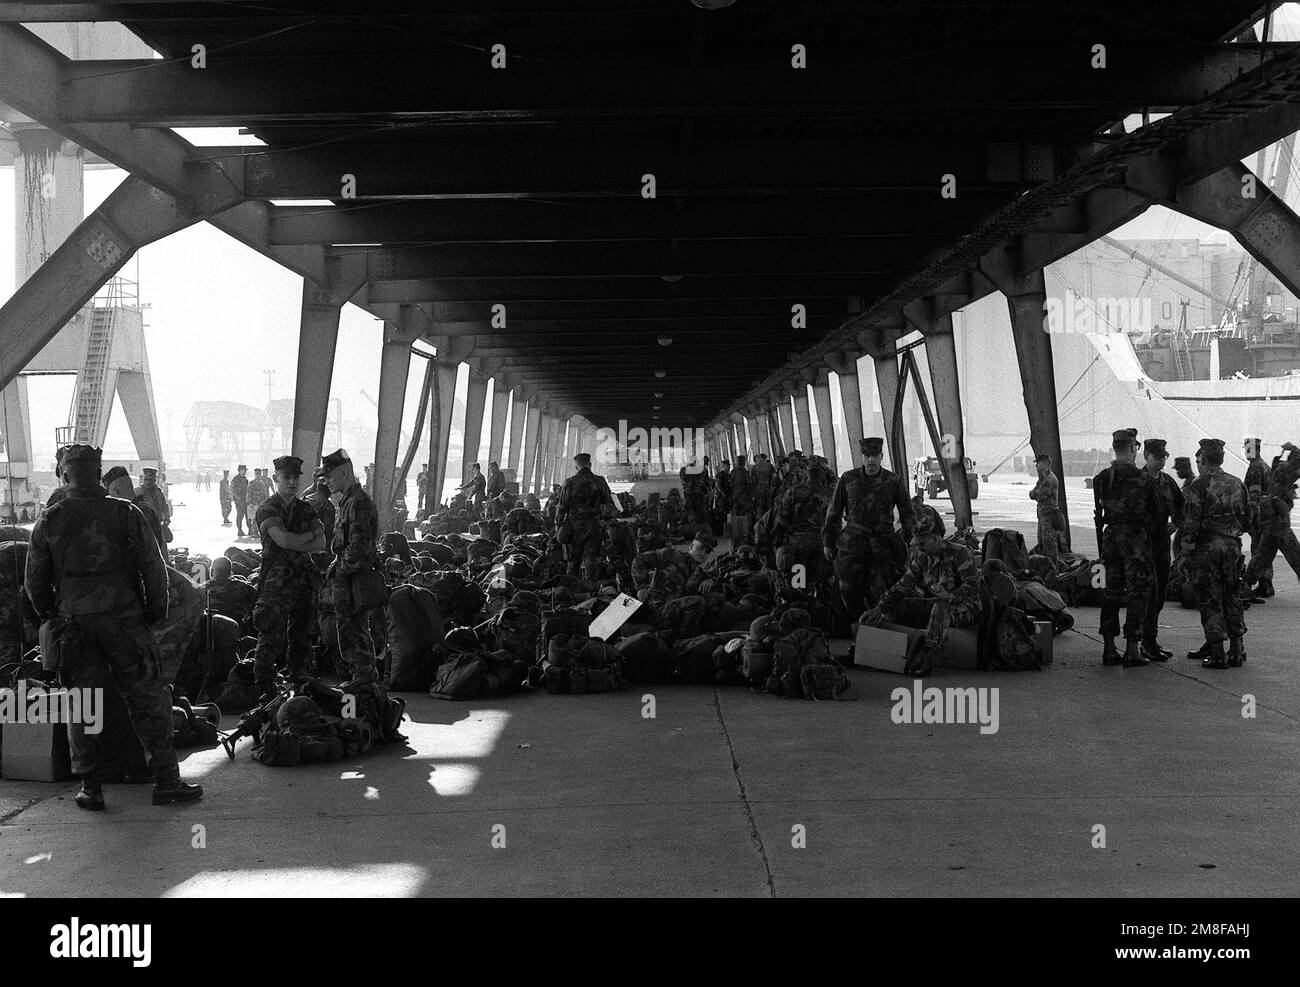 Marines sit beneath a structure on the pier as they await transportation to outlying camps during Operation Provide Comfort, an Allied effort to aid Kurdish refugees who fled from the forces of Saddam Hussein in northern Iraq. Subject Operation/Series: PROVIDE COMFORT Base: Iskenderum Country: Turkey (TUR) Stock Photo